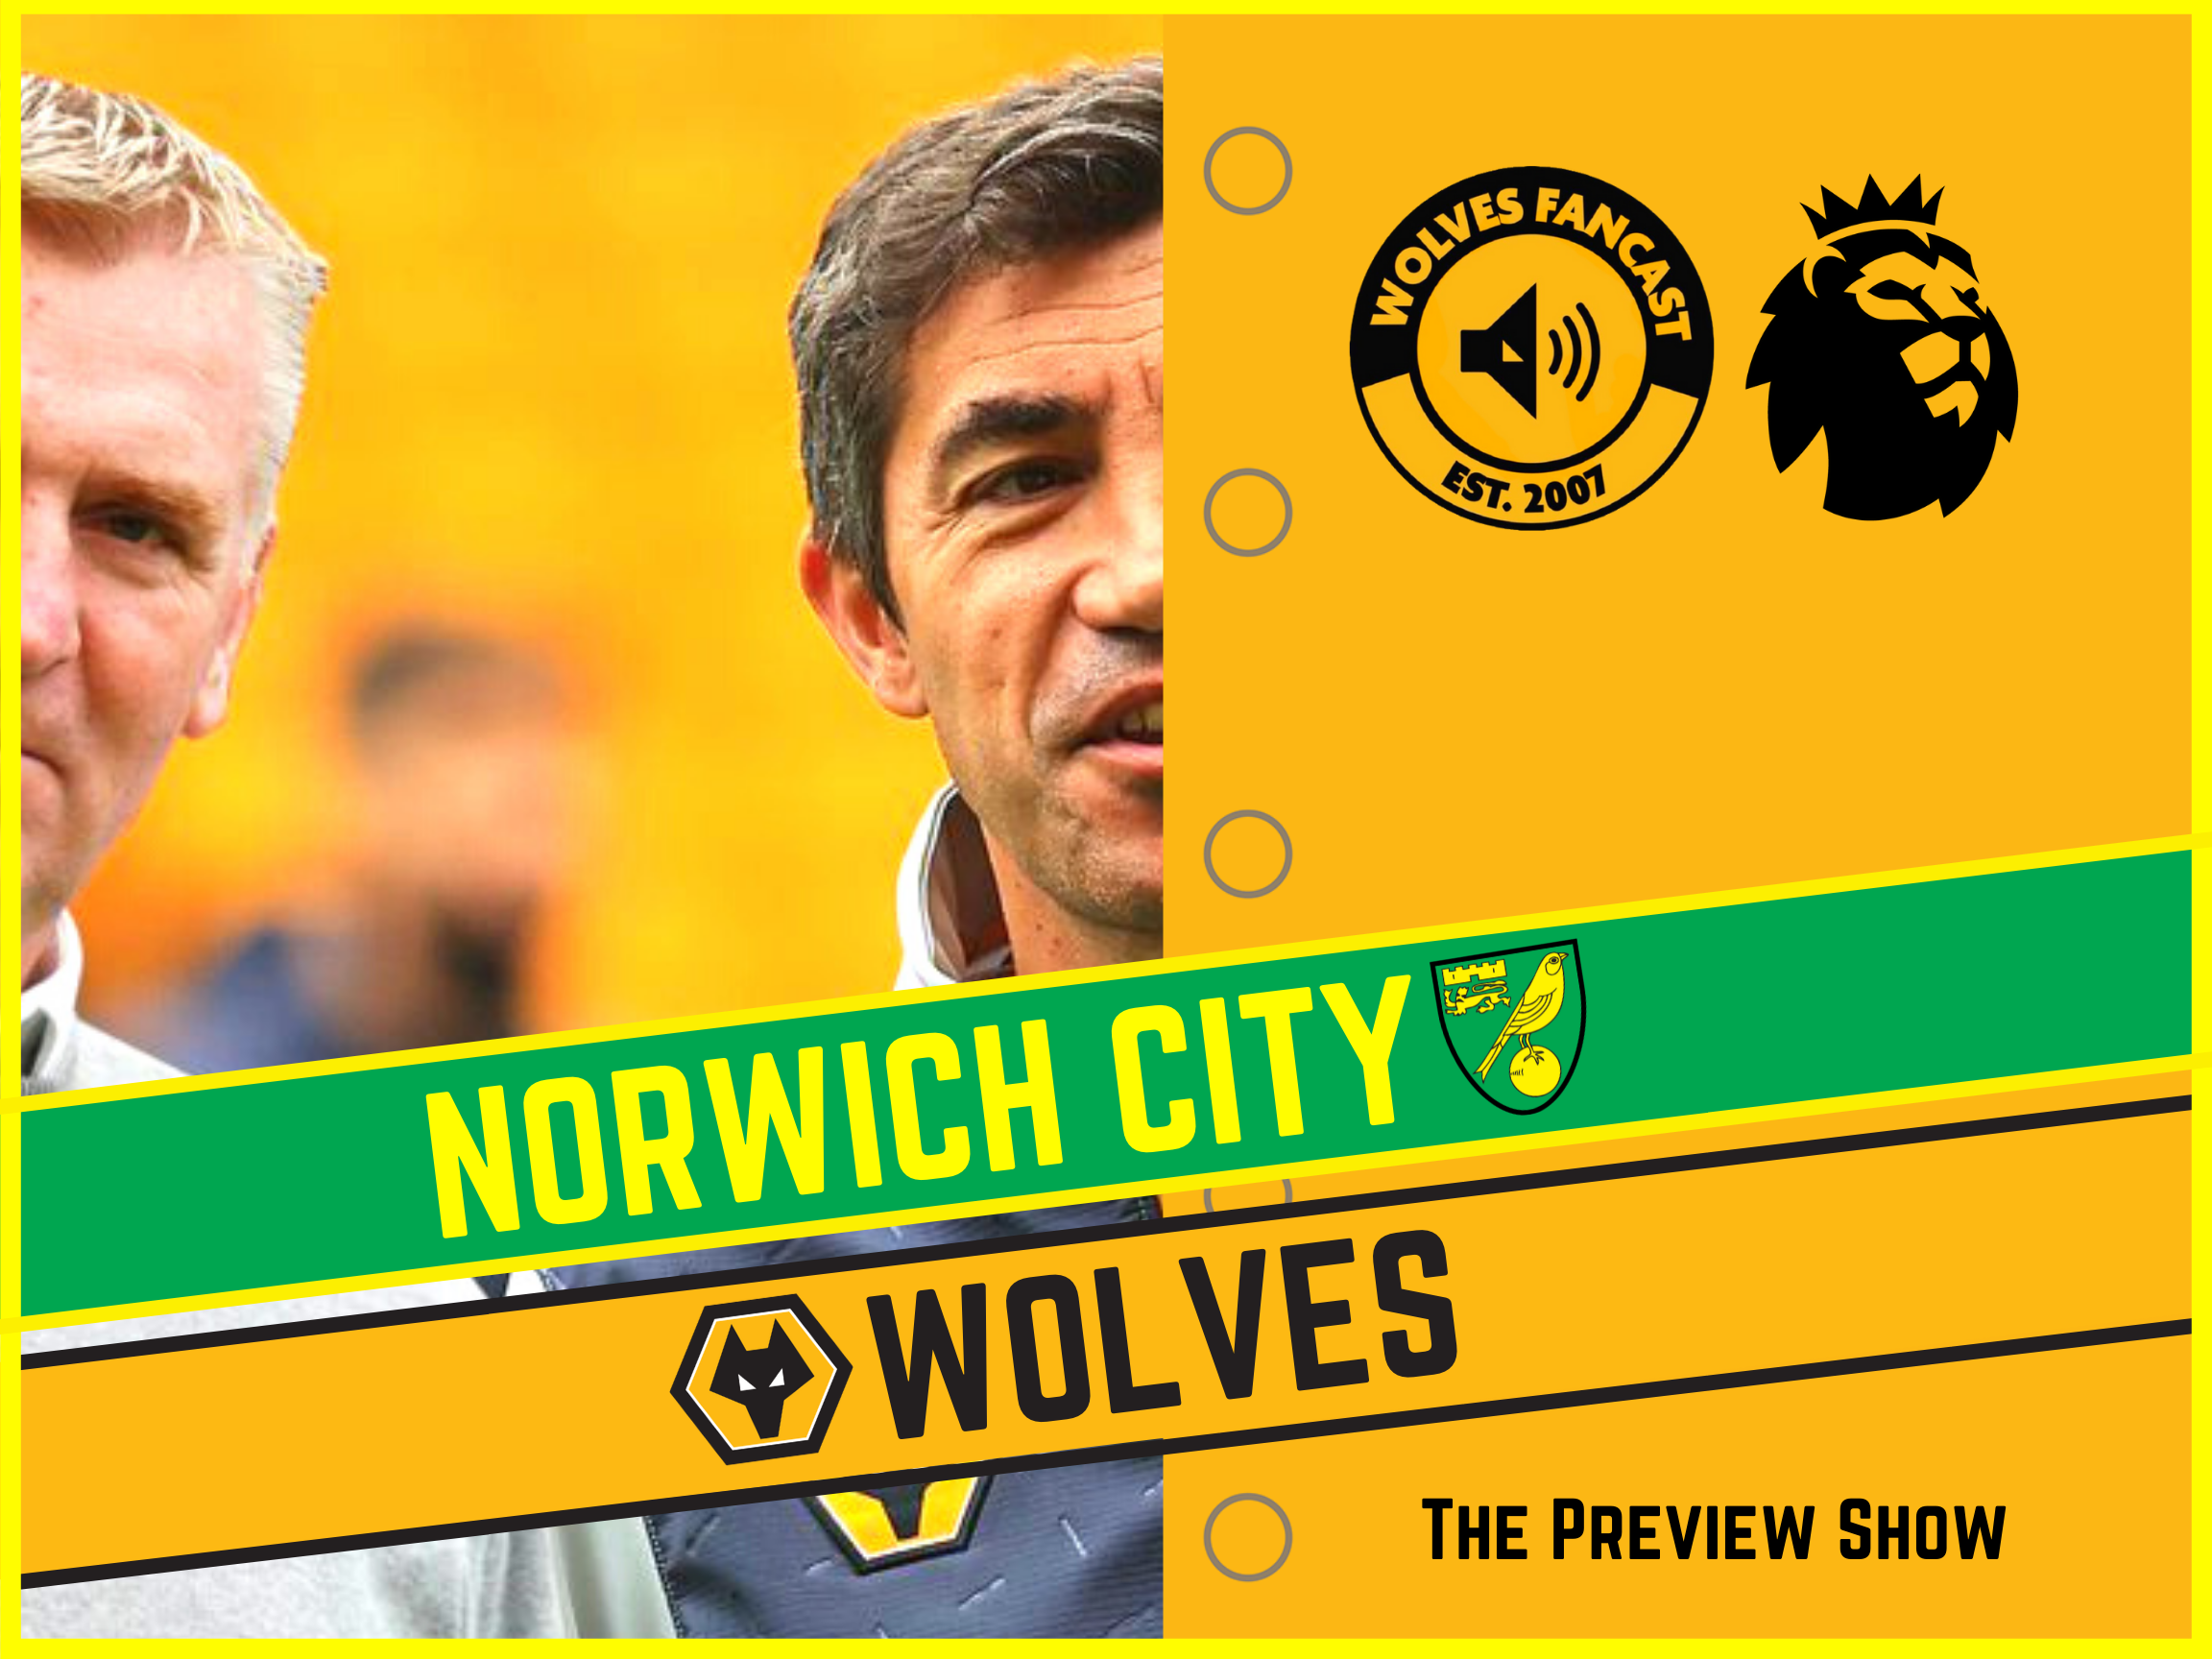 Norwich vs Wolves Preview Show | 'They only hate Wolves & Ipswich'